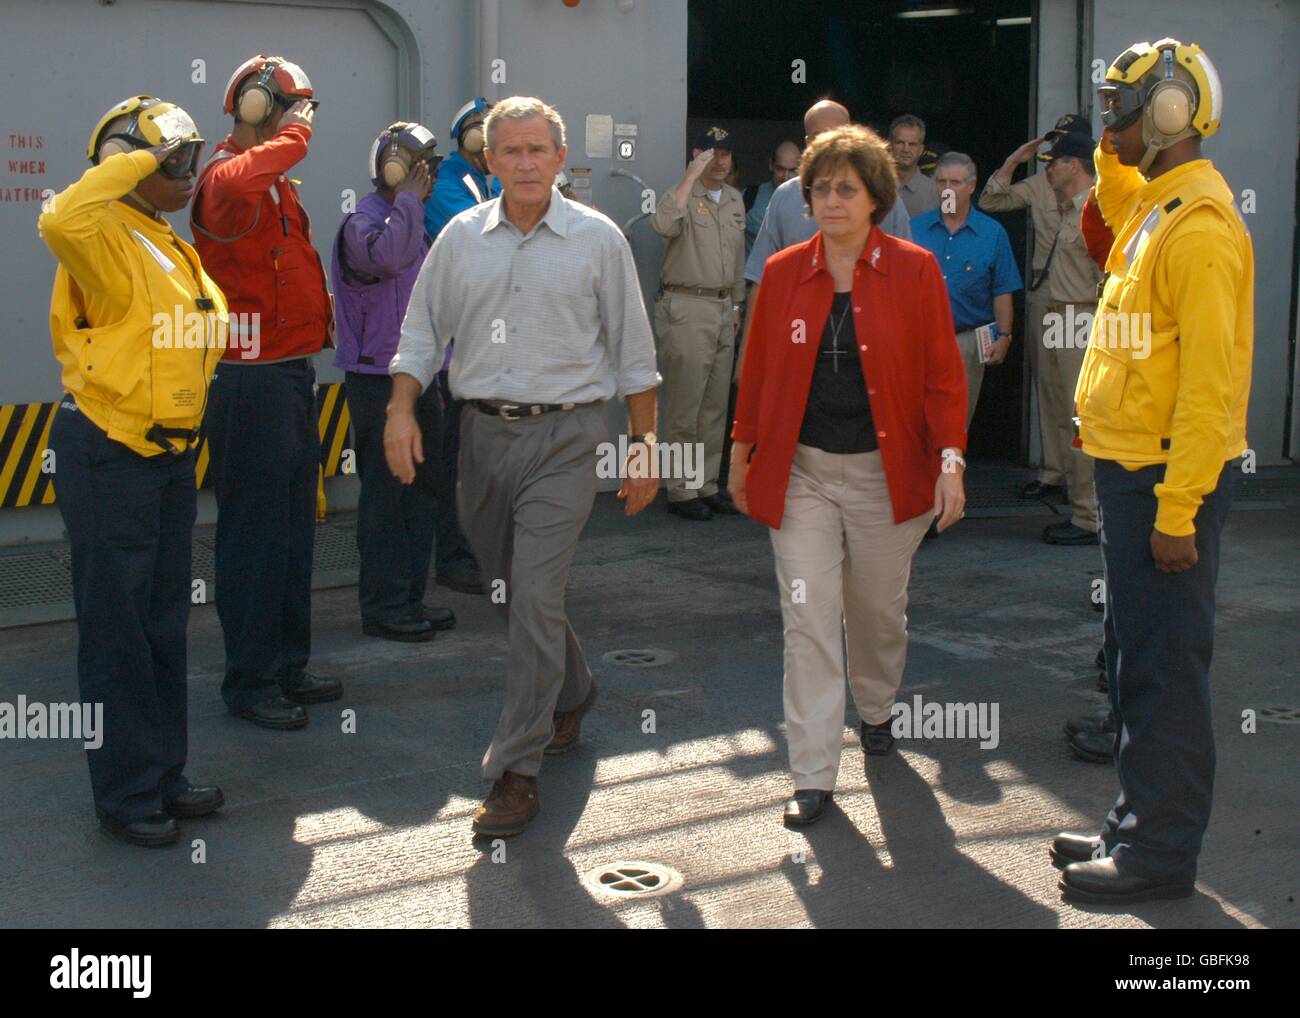 U.S. President George W. Bush and Louisiana Gov. Kathleen Blanco are saluted as they pass through sideboys on the flight deck aboard the amphibious assault ship USS Iwo Jima September 12, 2005 in New Orleans, Louisiana. Bush and Blanco visited the Iwo Jima to be briefed on the status of Joint Task Force Hurricane Katrina relief efforts. Stock Photo